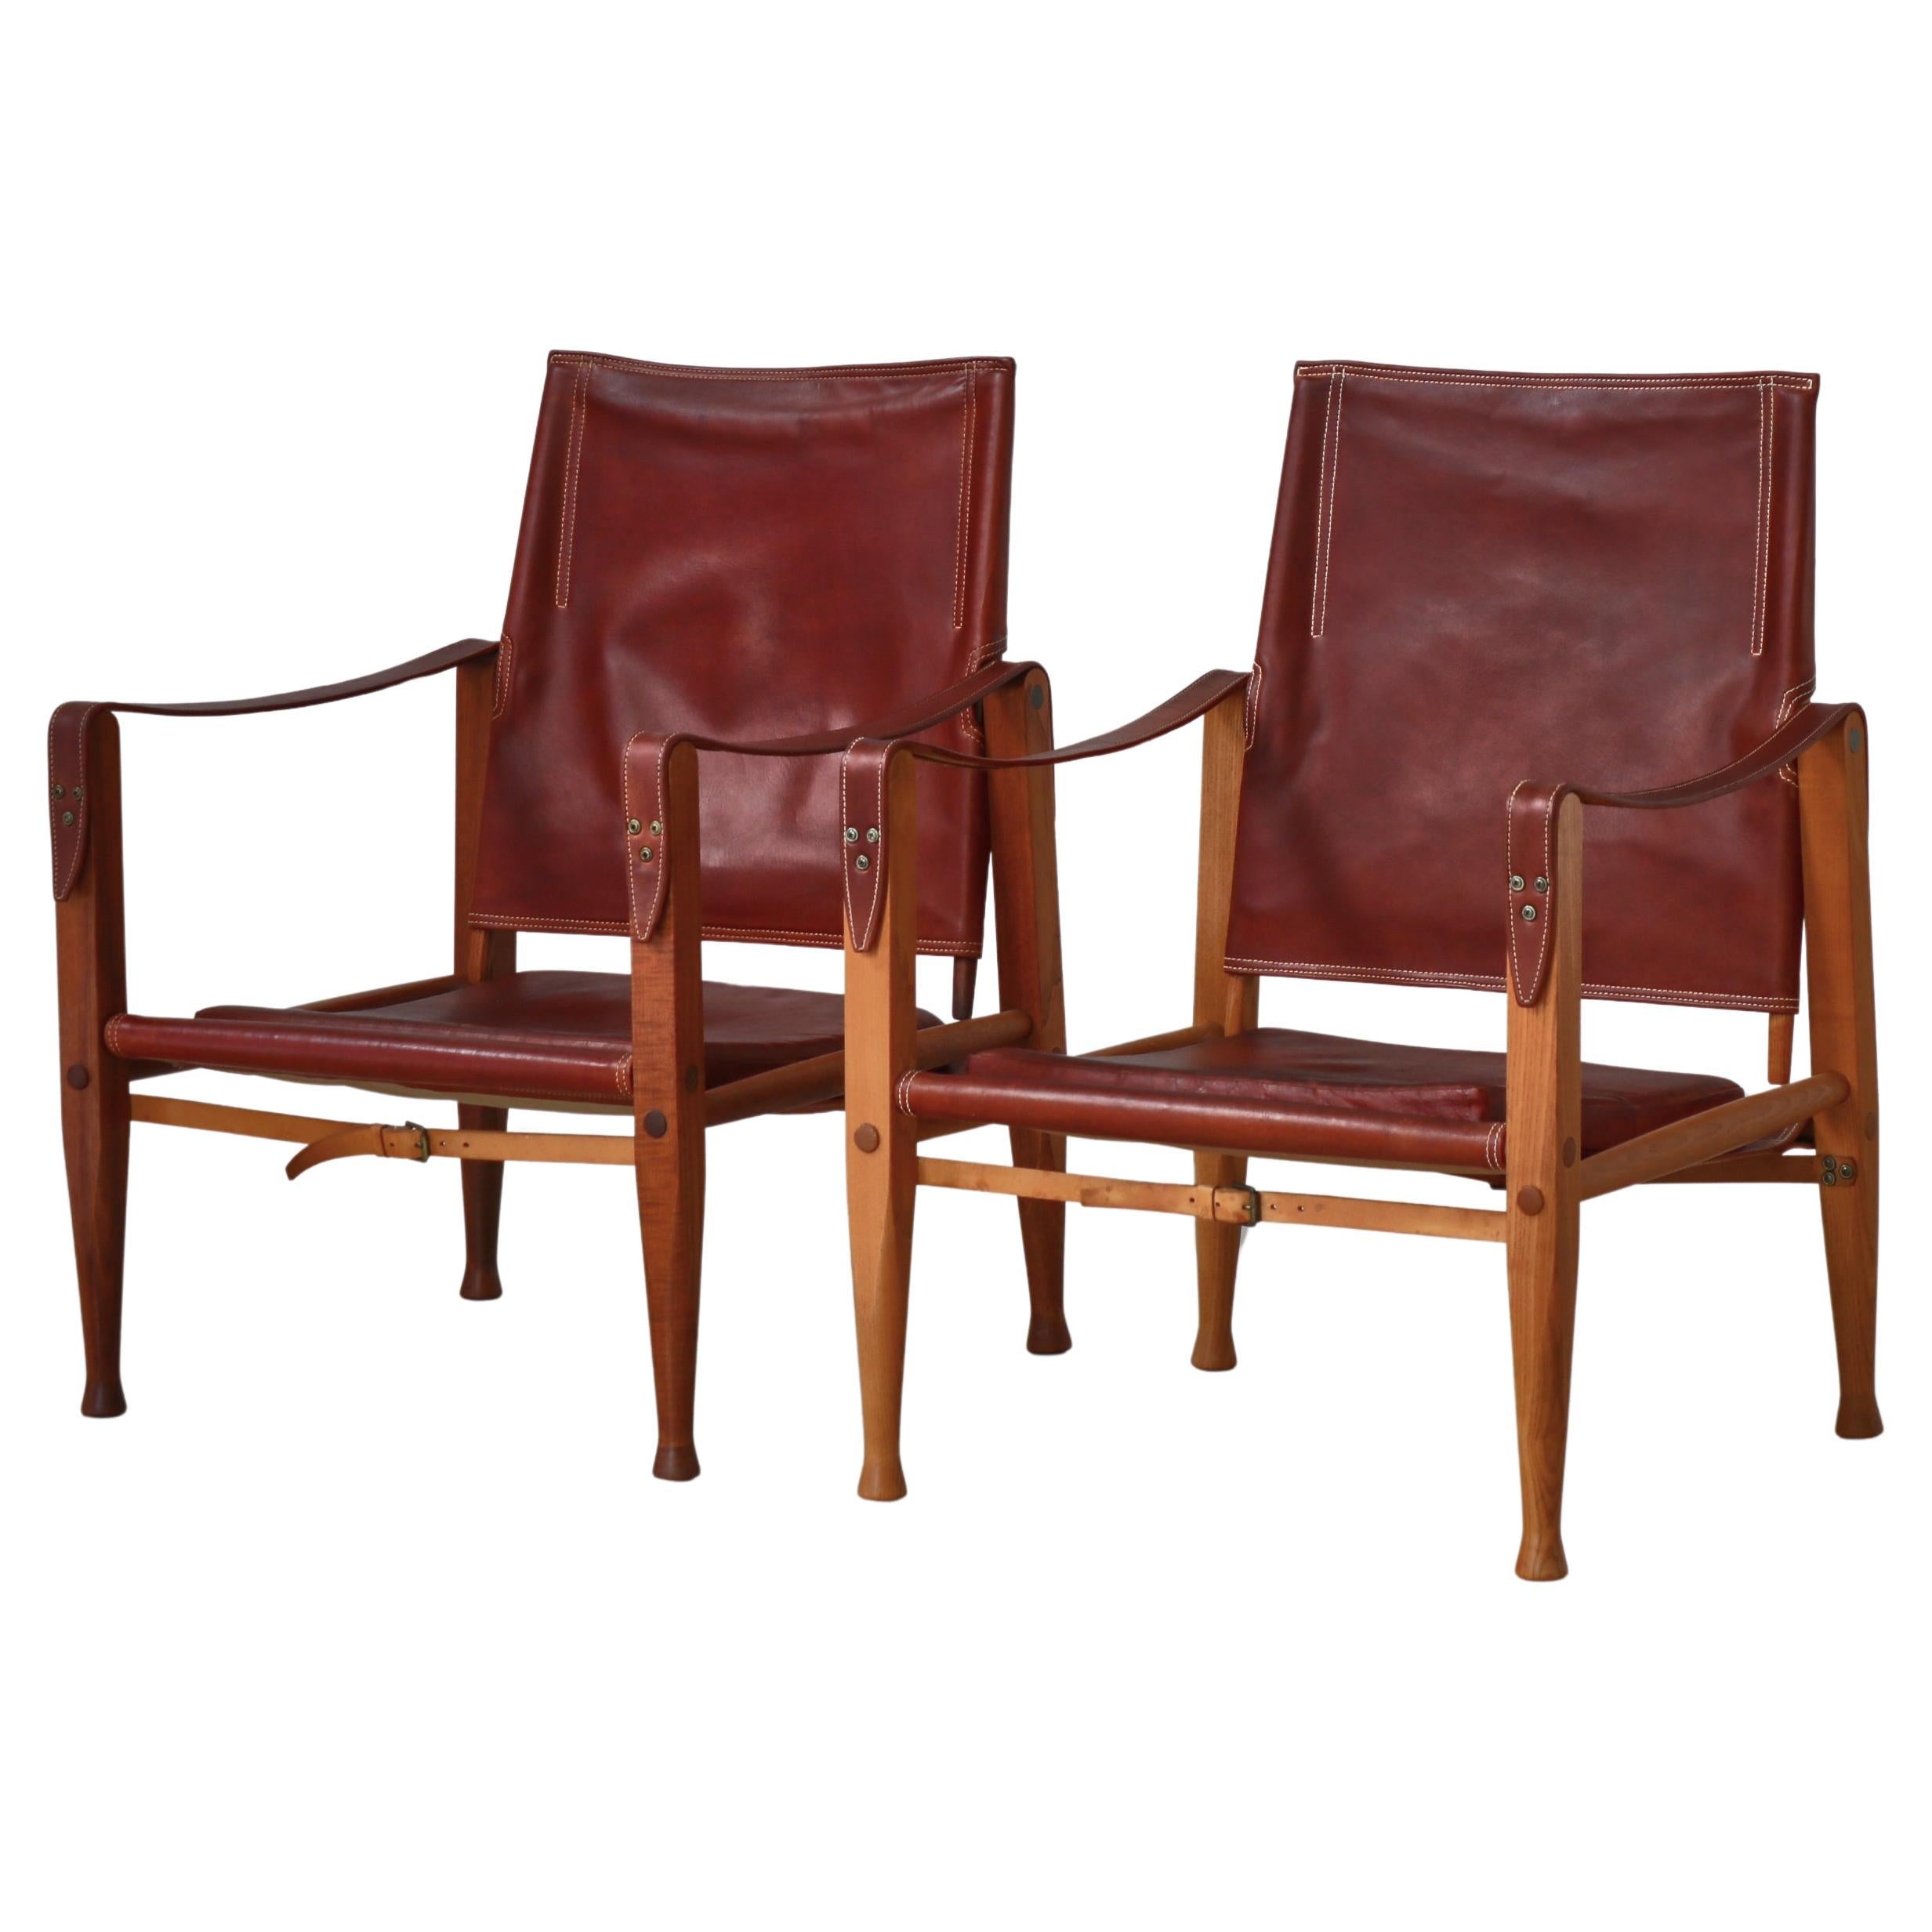 Kaare Klint "Safari" Lounge Chairs in Red Leather and Ash, Rud Rasmussen, 1950s For Sale